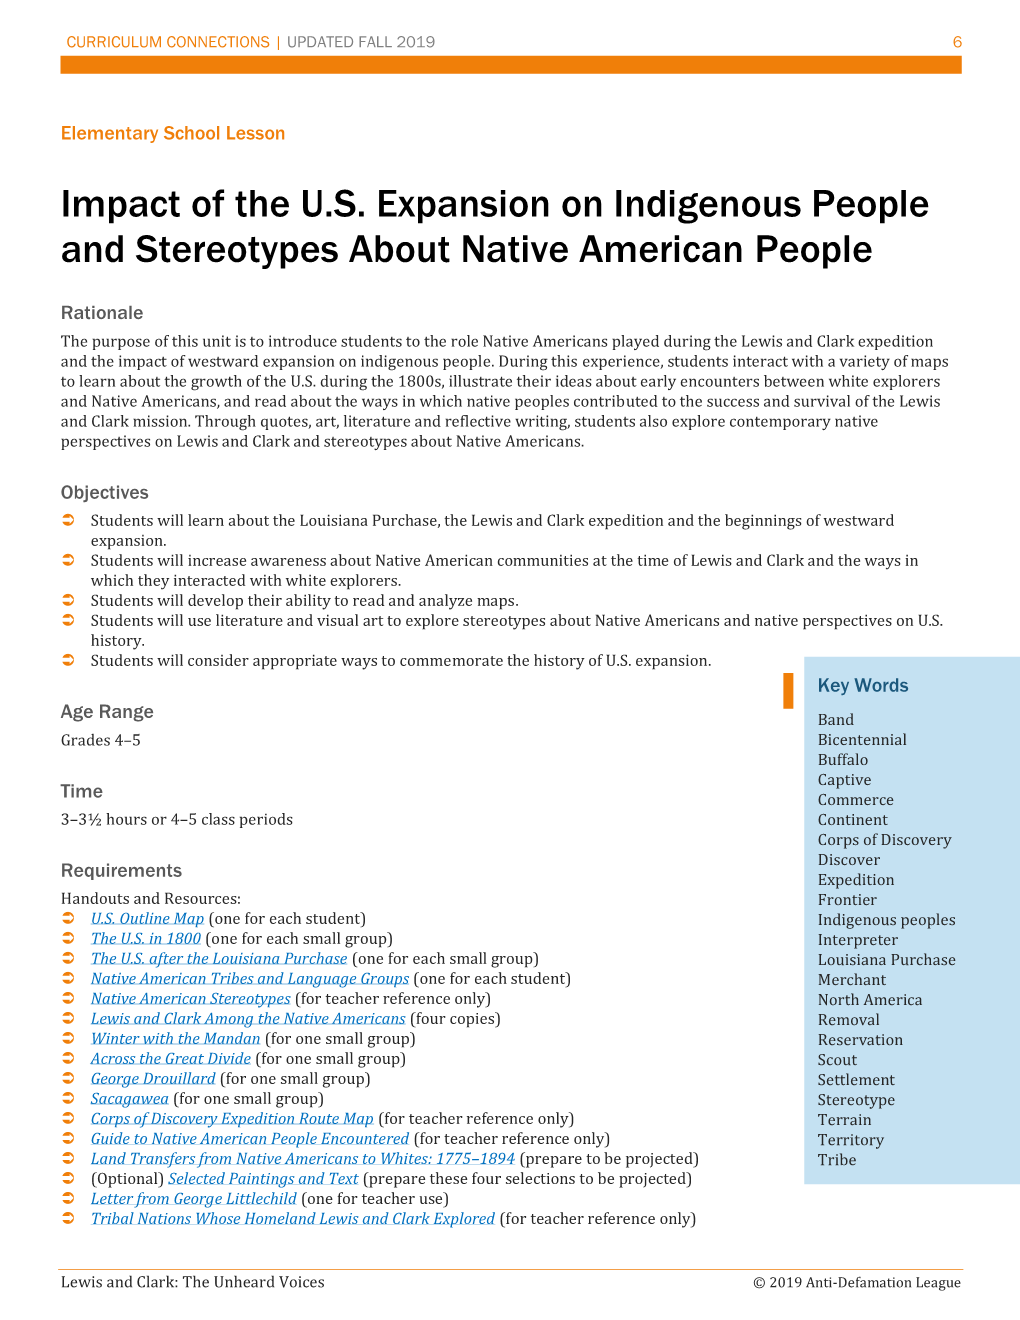 Impact of the U.S. Expansion on Indigenous People and Stereotypes About Native American People